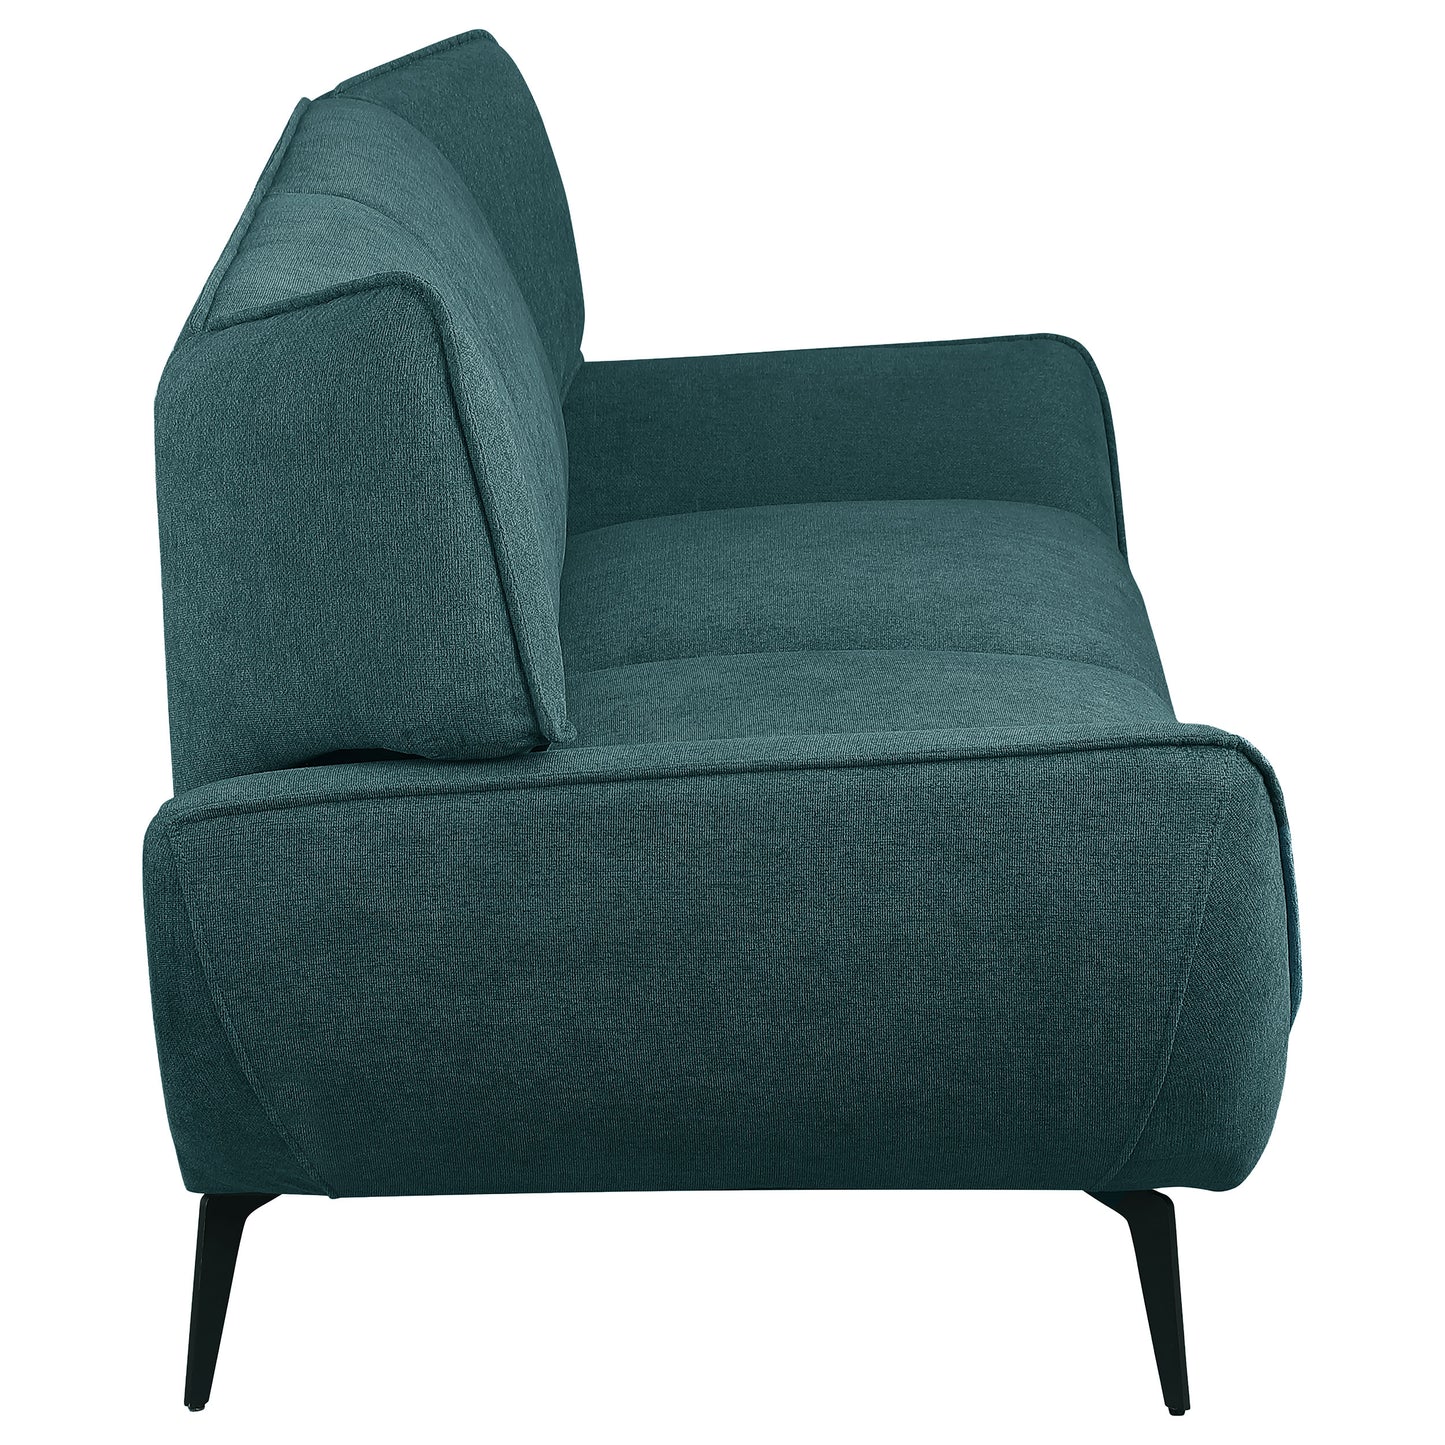 Acton 3-piece Upholstered Flared Arm Sofa Set Teal Blue